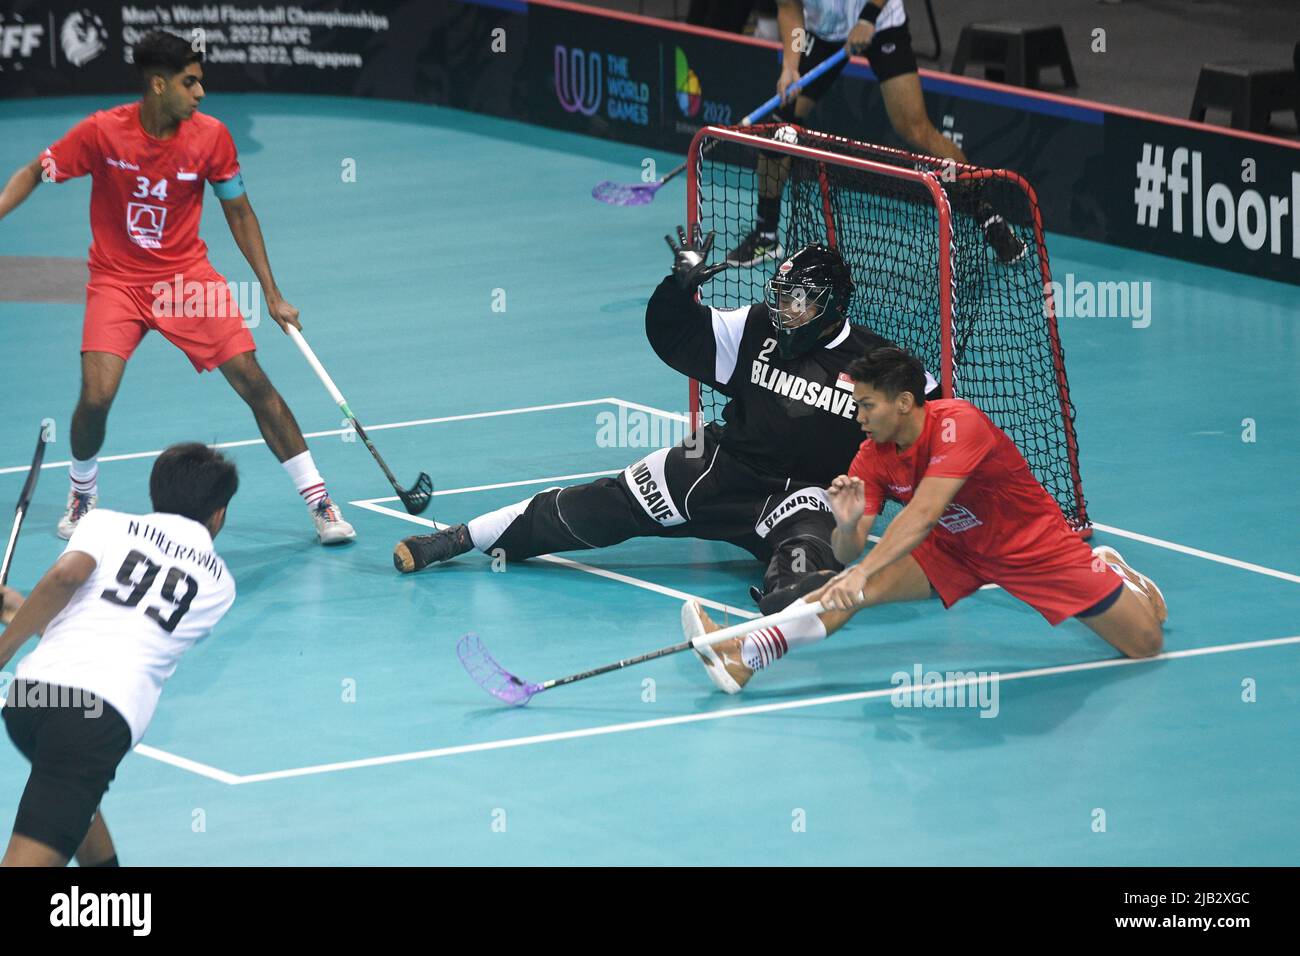 https://c8.alamy.com/comp/2JB2XGC/singapore-aofc-asia-oceania-floorball-confederation-in-singapore-2nd-june-2022-noisoi-theerawat-bottom-l-of-thailand-scores-a-goal-during-a-group-h-match-at-the-mens-world-floorball-championships-qualification-2022-aofc-asia-oceania-floorball-confederation-in-singapore-june-2-2022-credit-then-chih-weyxinhuaalamy-live-news-2JB2XGC.jpg